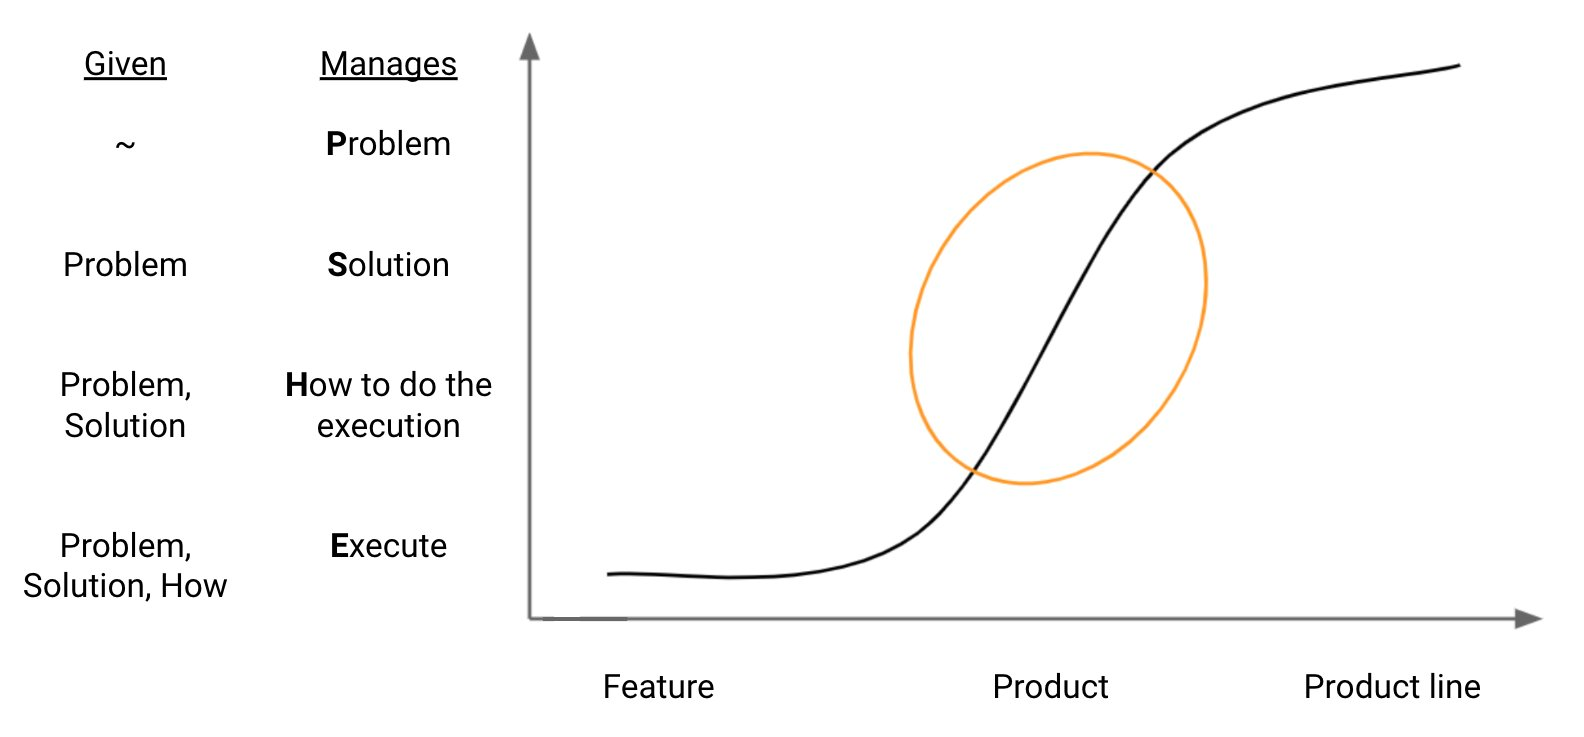 The Product Strategist Role – Responsibilities, Traits, and Career Path